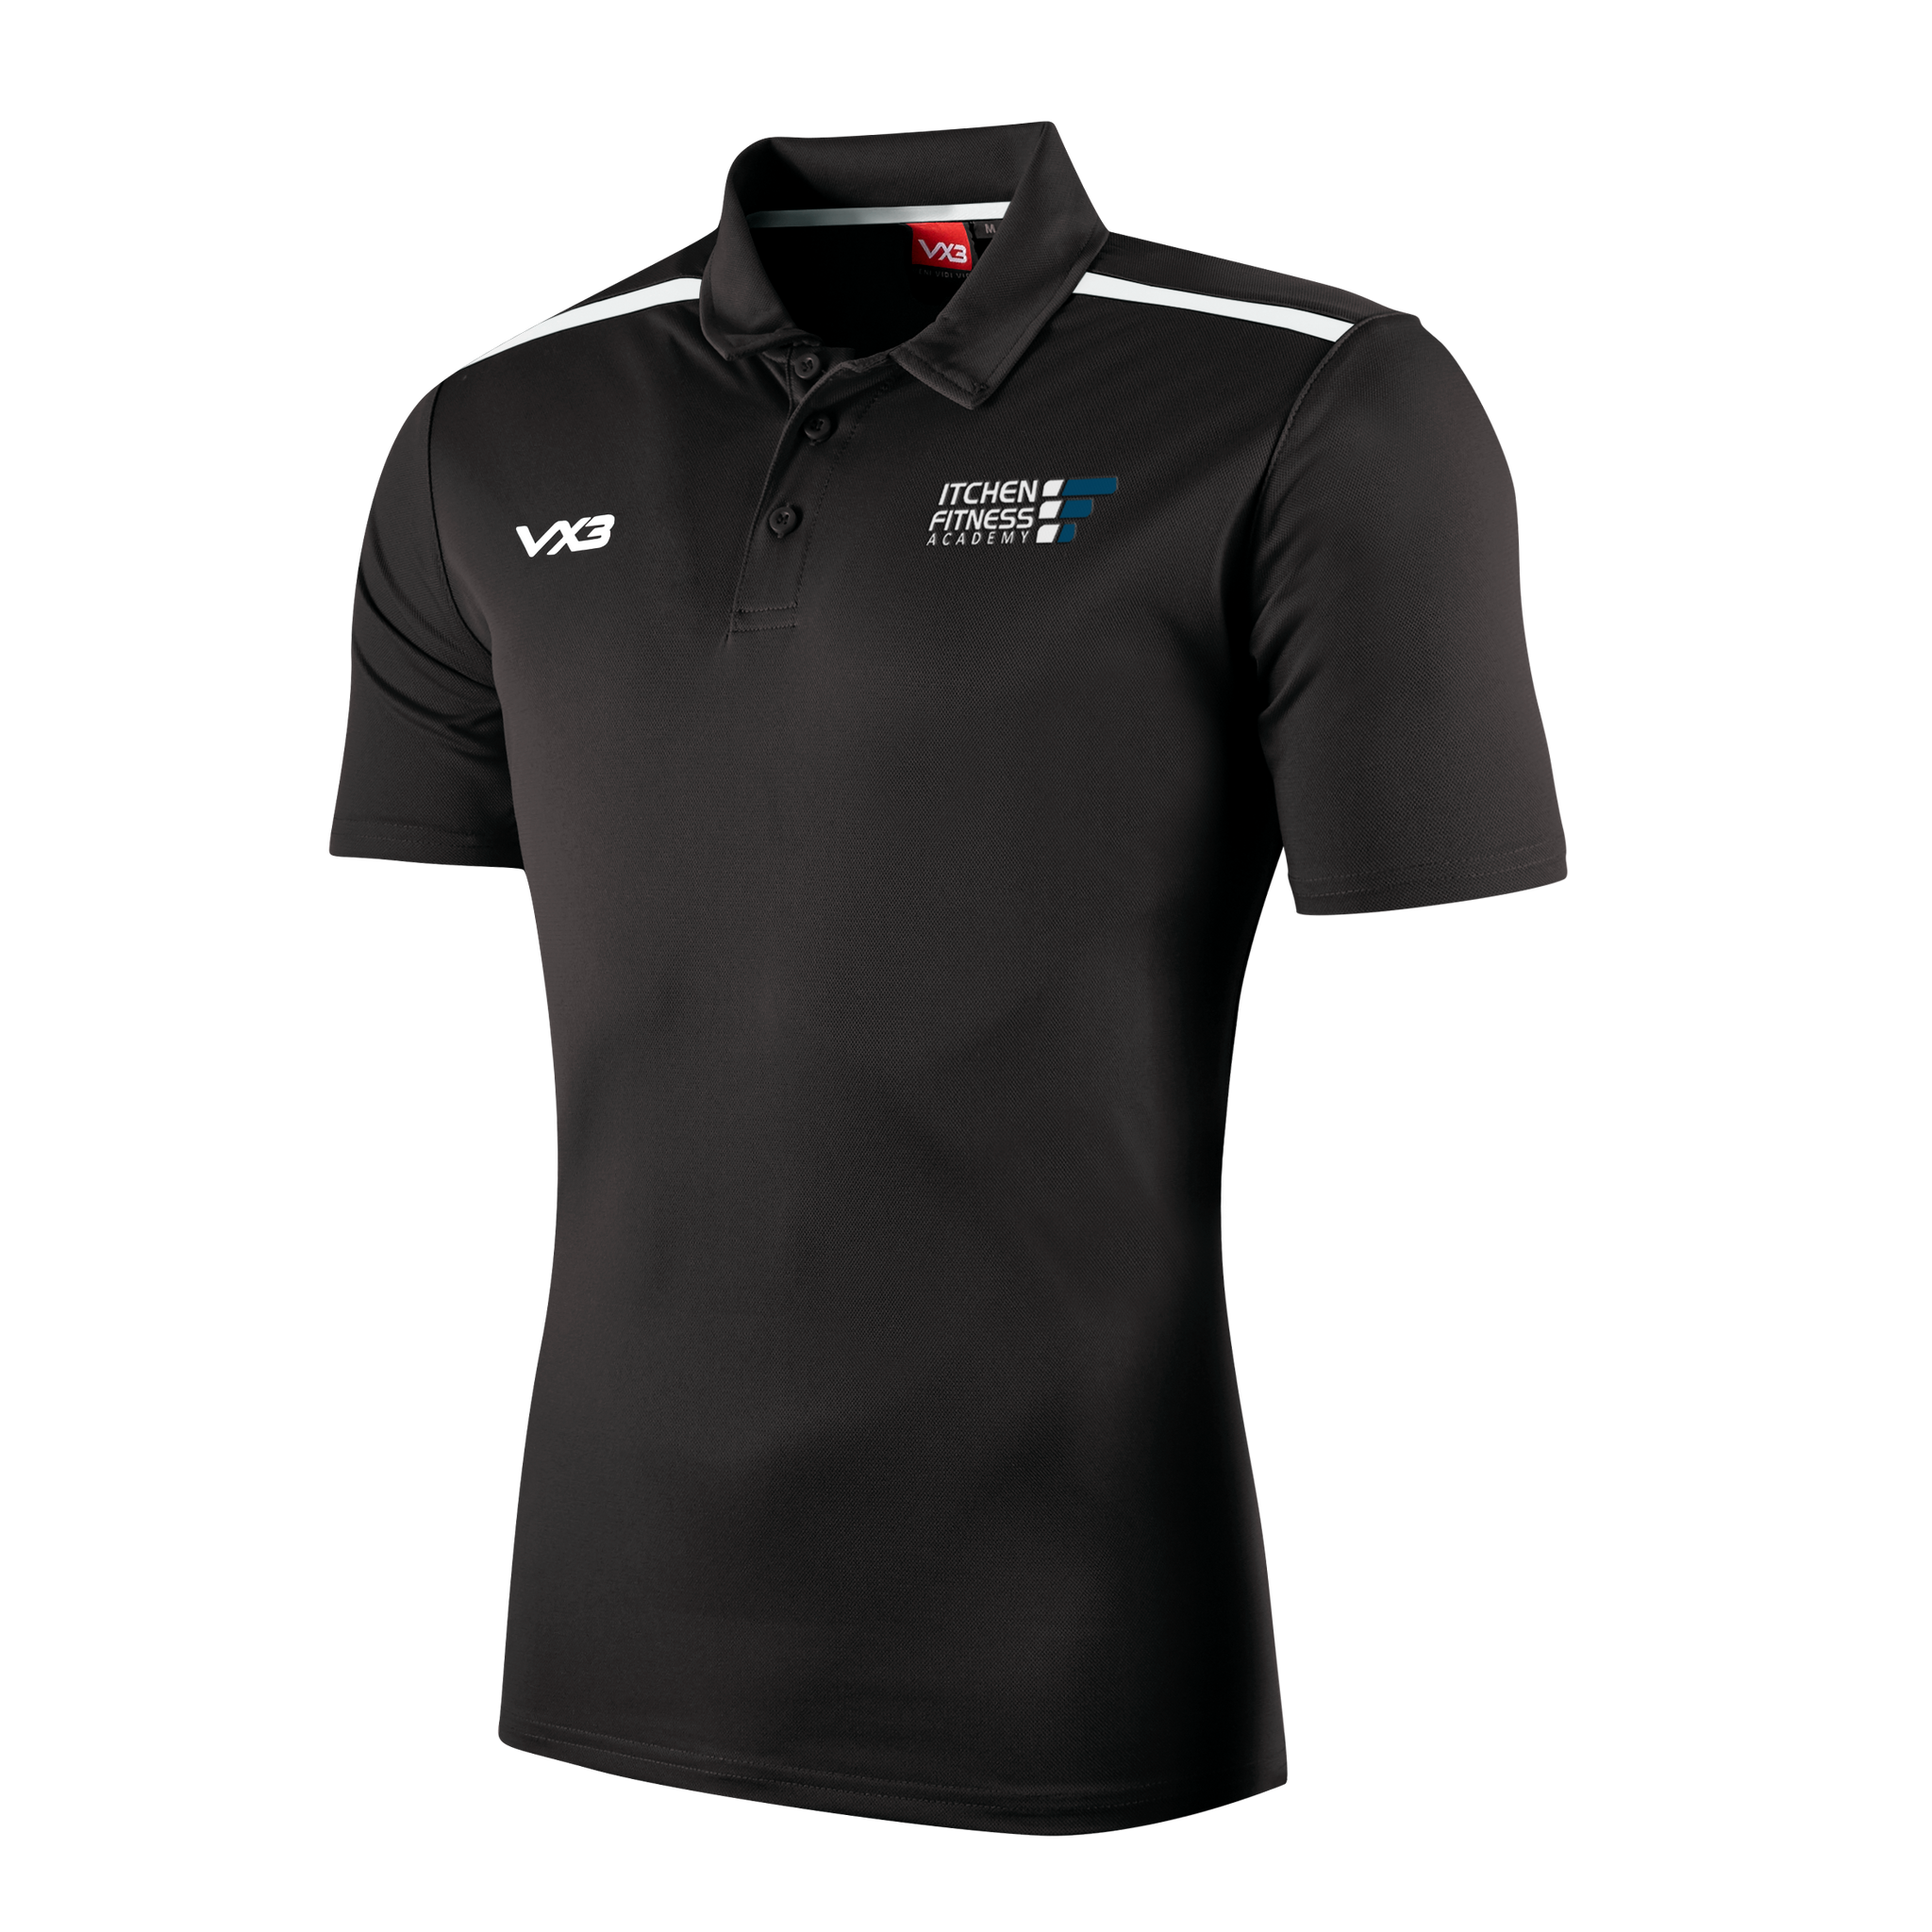 Itchen College Fitness Academy Fortis Polo